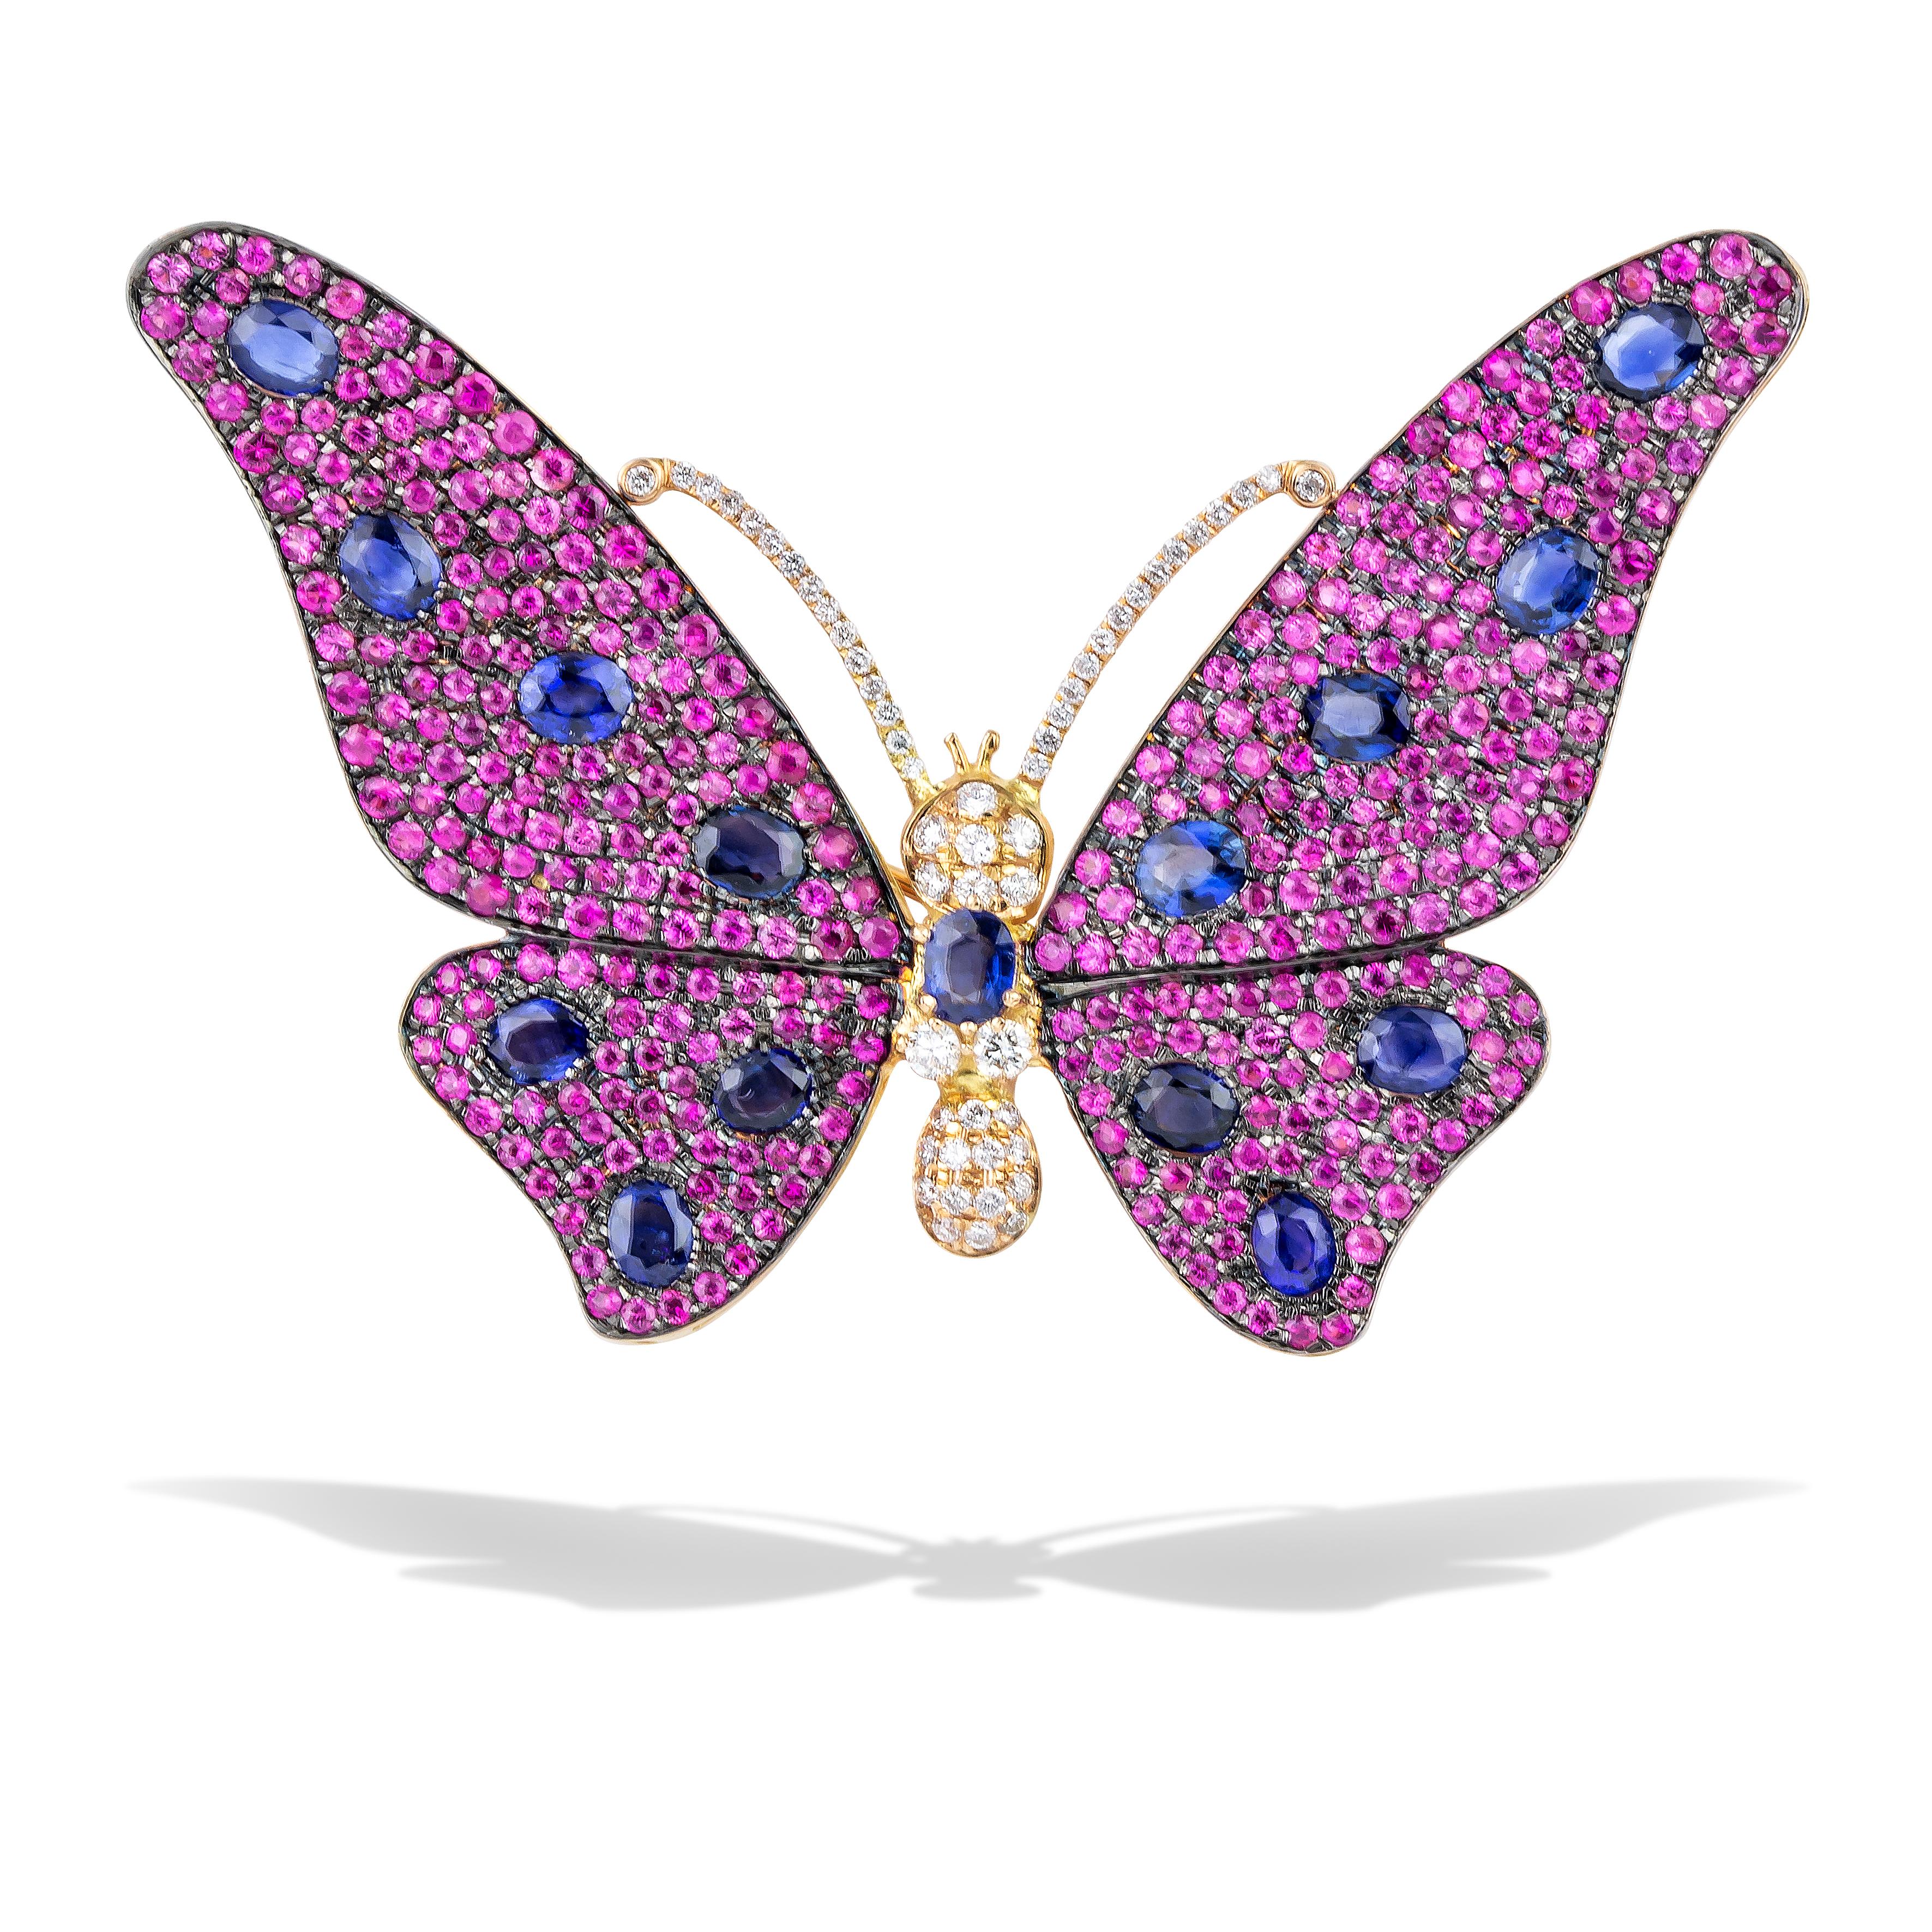 Unique Butterfly Brooch with pave pink-red sapphires, brilliant cut diamonds and oval blue sapphires, handcrafted in 18Kt rose gold. The elegance of the Greek nature inspired Nicofilimon to create this masterpiece. Set in rose gold, interlacing pink